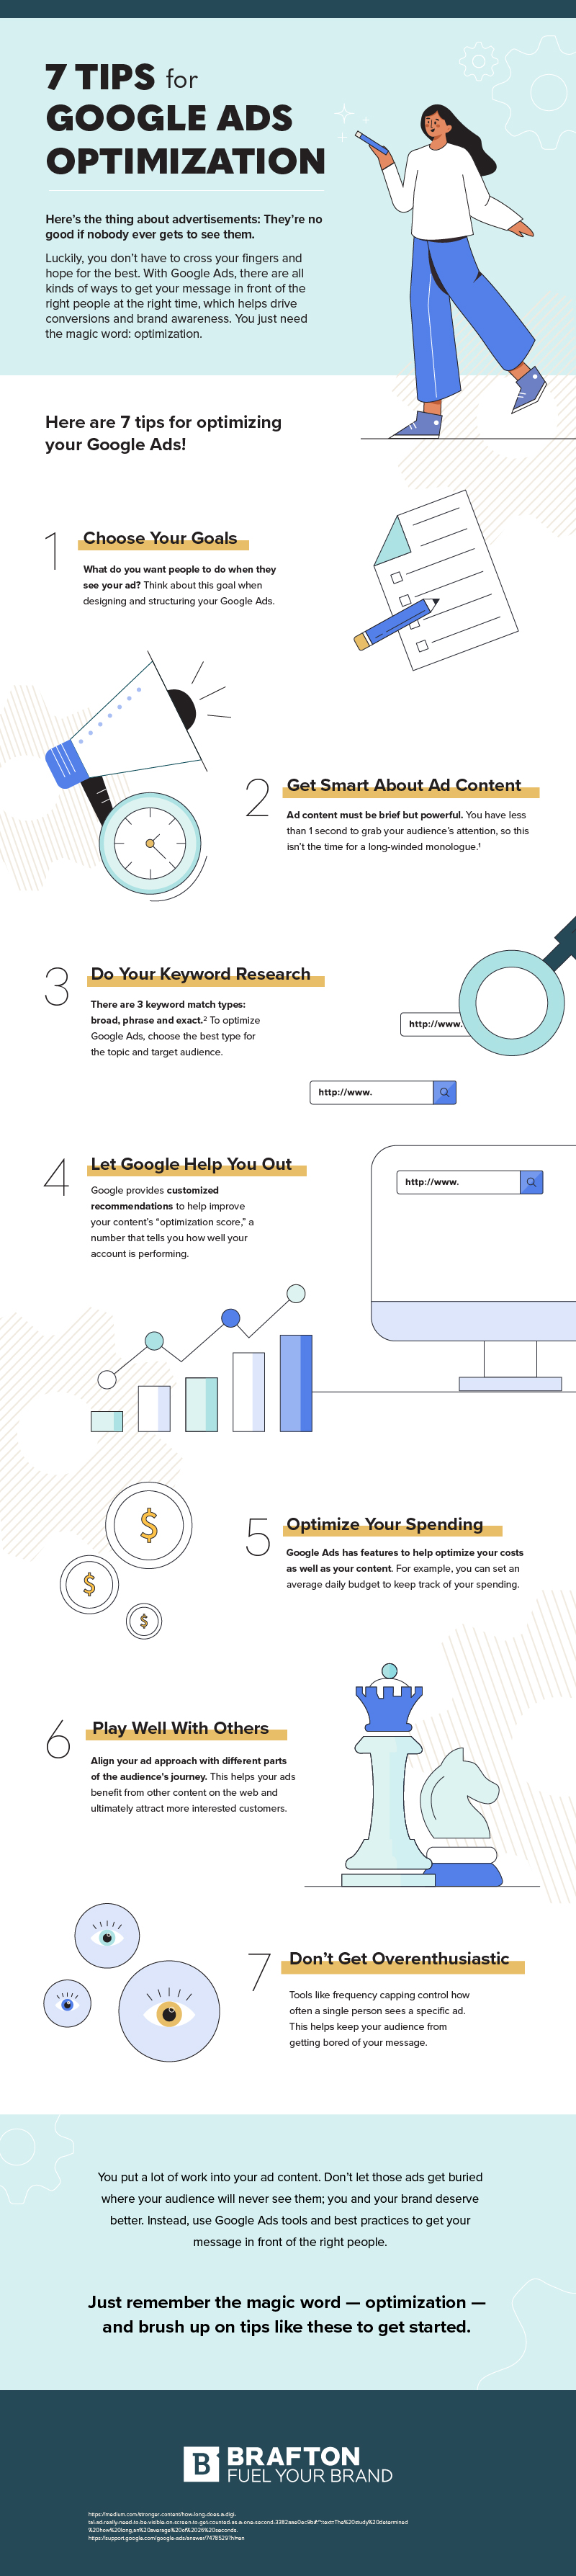 7 Tips for Google Ads Optimization Infographic